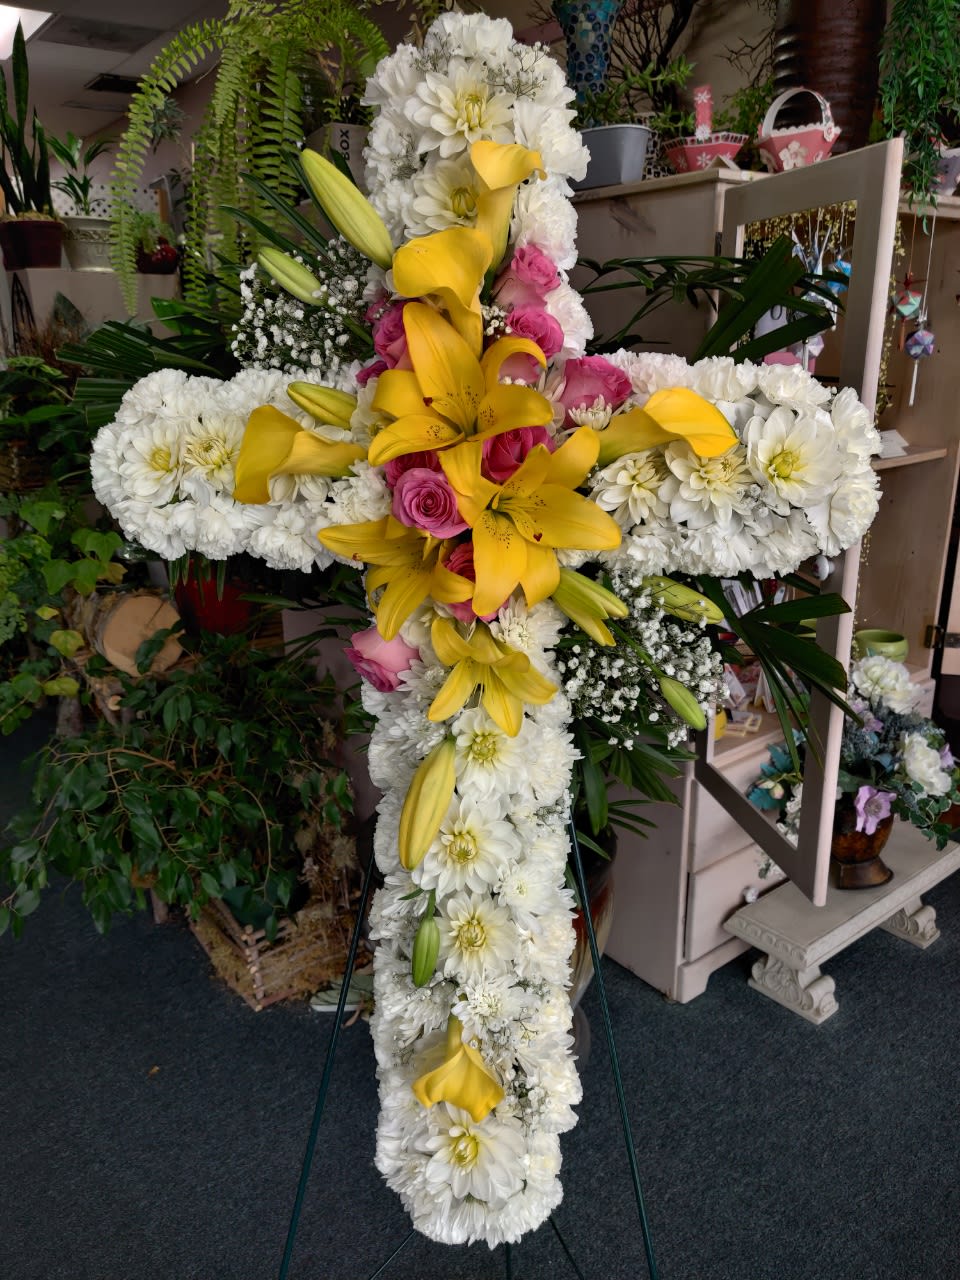 Contains Lilies, Calla Lilies, Roses, Dahlias, Carnations, Poms.